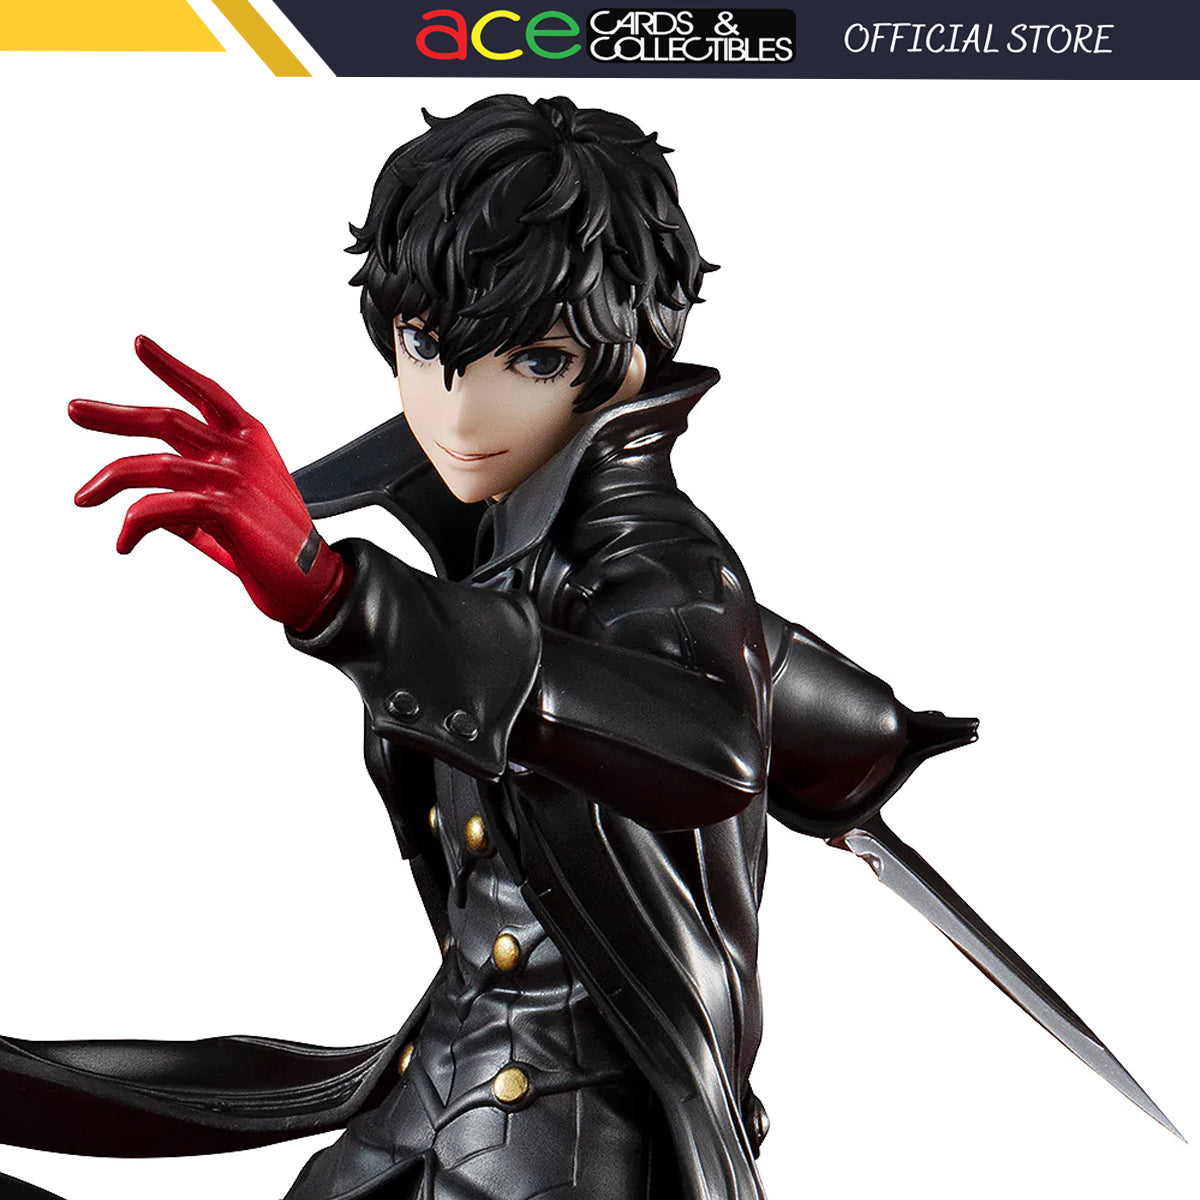 Persona 5 Lucrea Series "The Royal Joker"-MegaHouse-Ace Cards & Collectibles